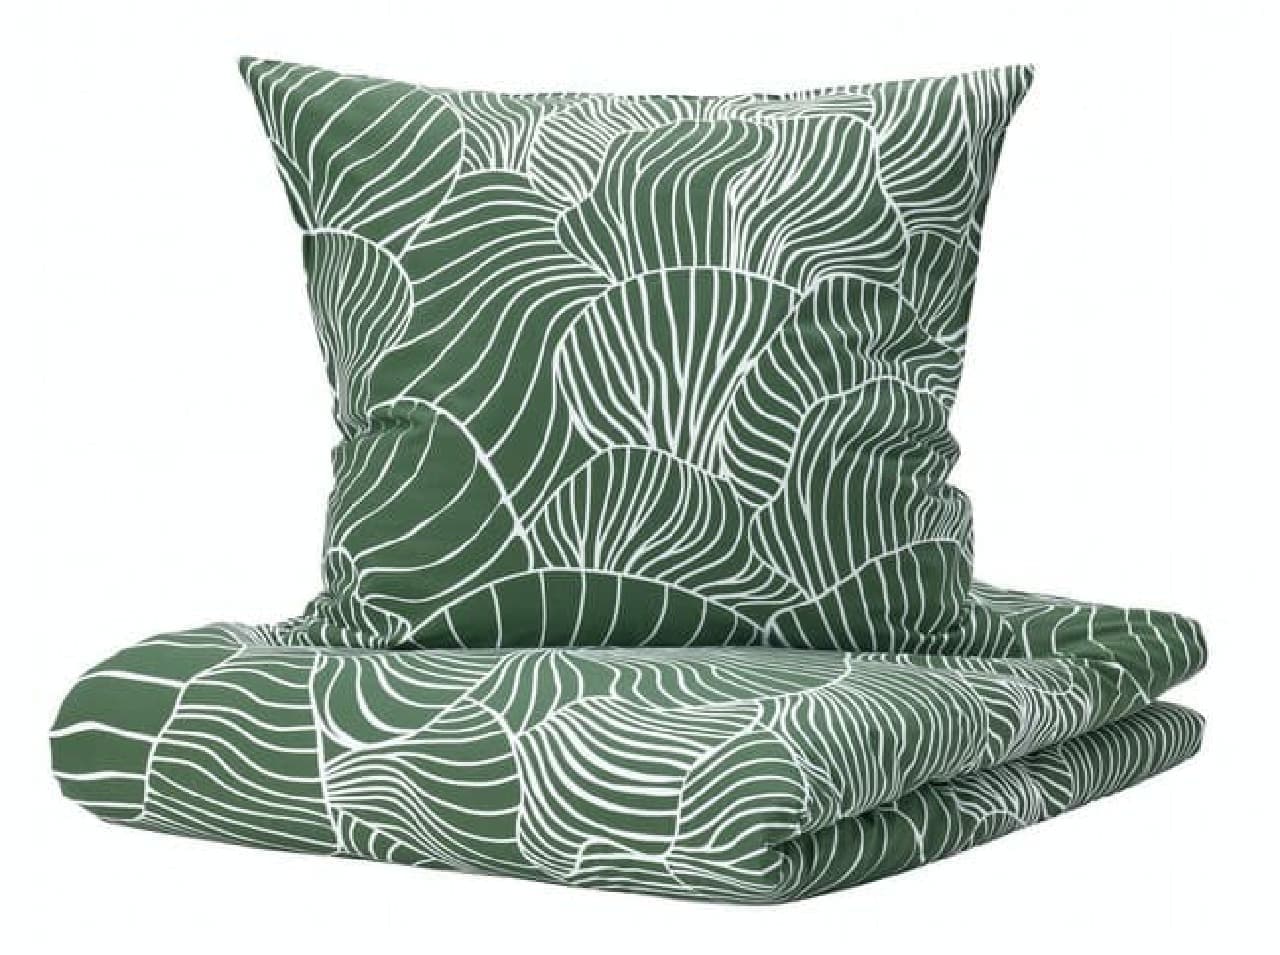 IKEA October new products--Sofas, bedding and more for peace! Environmentally friendly